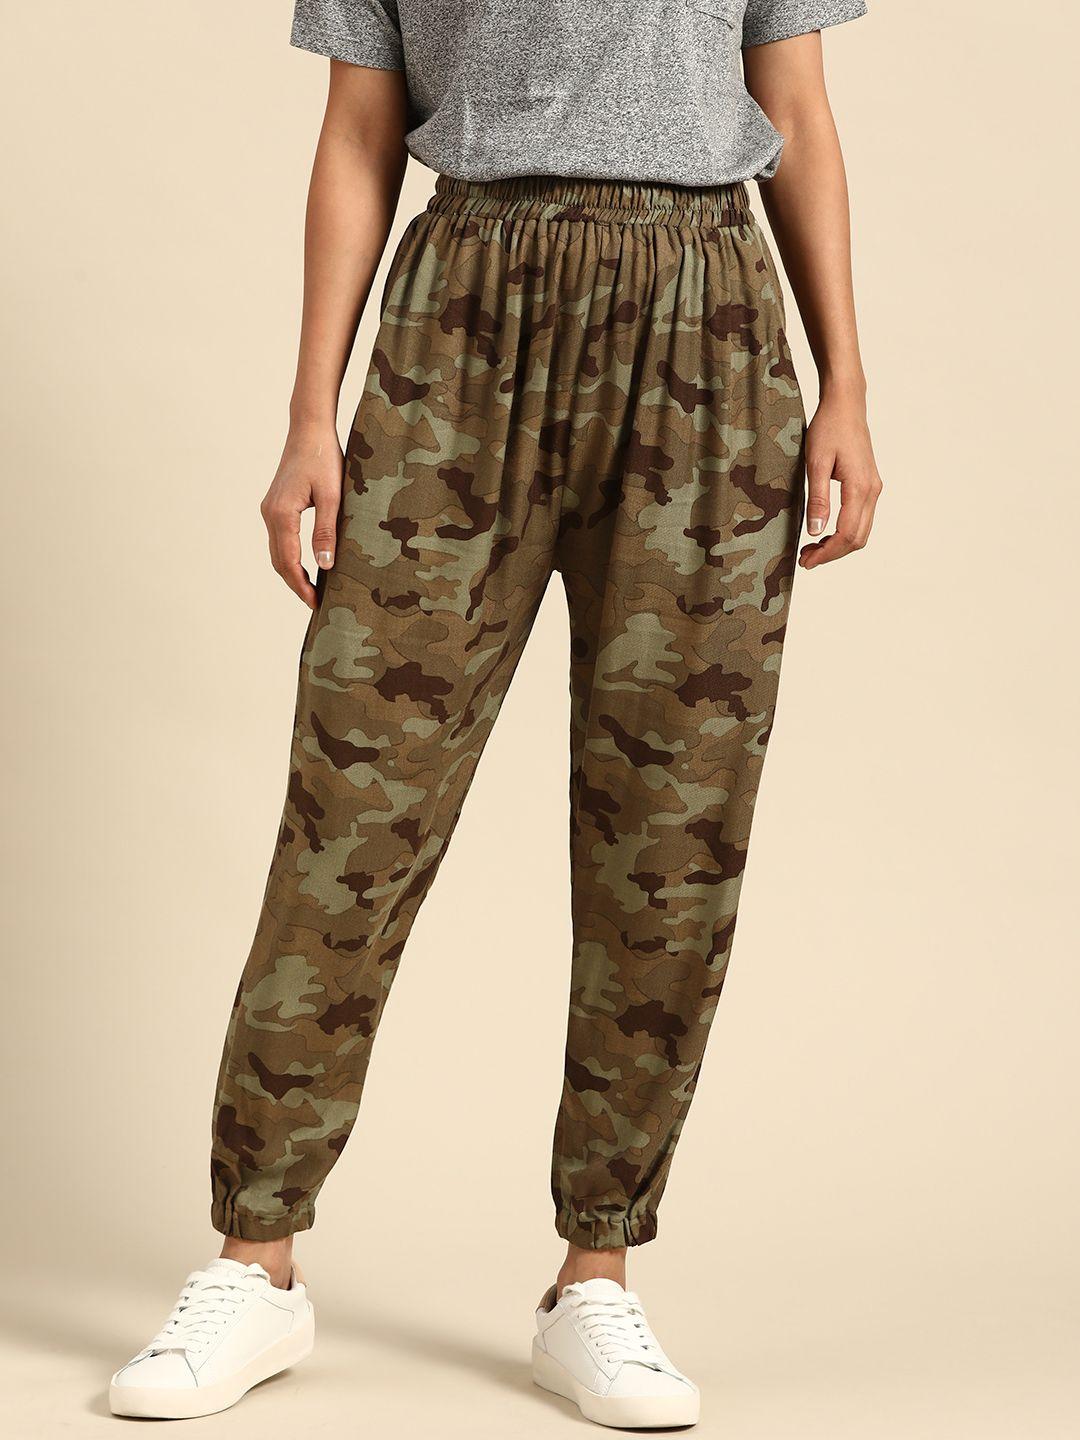 tag 7 women olive green & brown relaxed fit camouflage print joggers